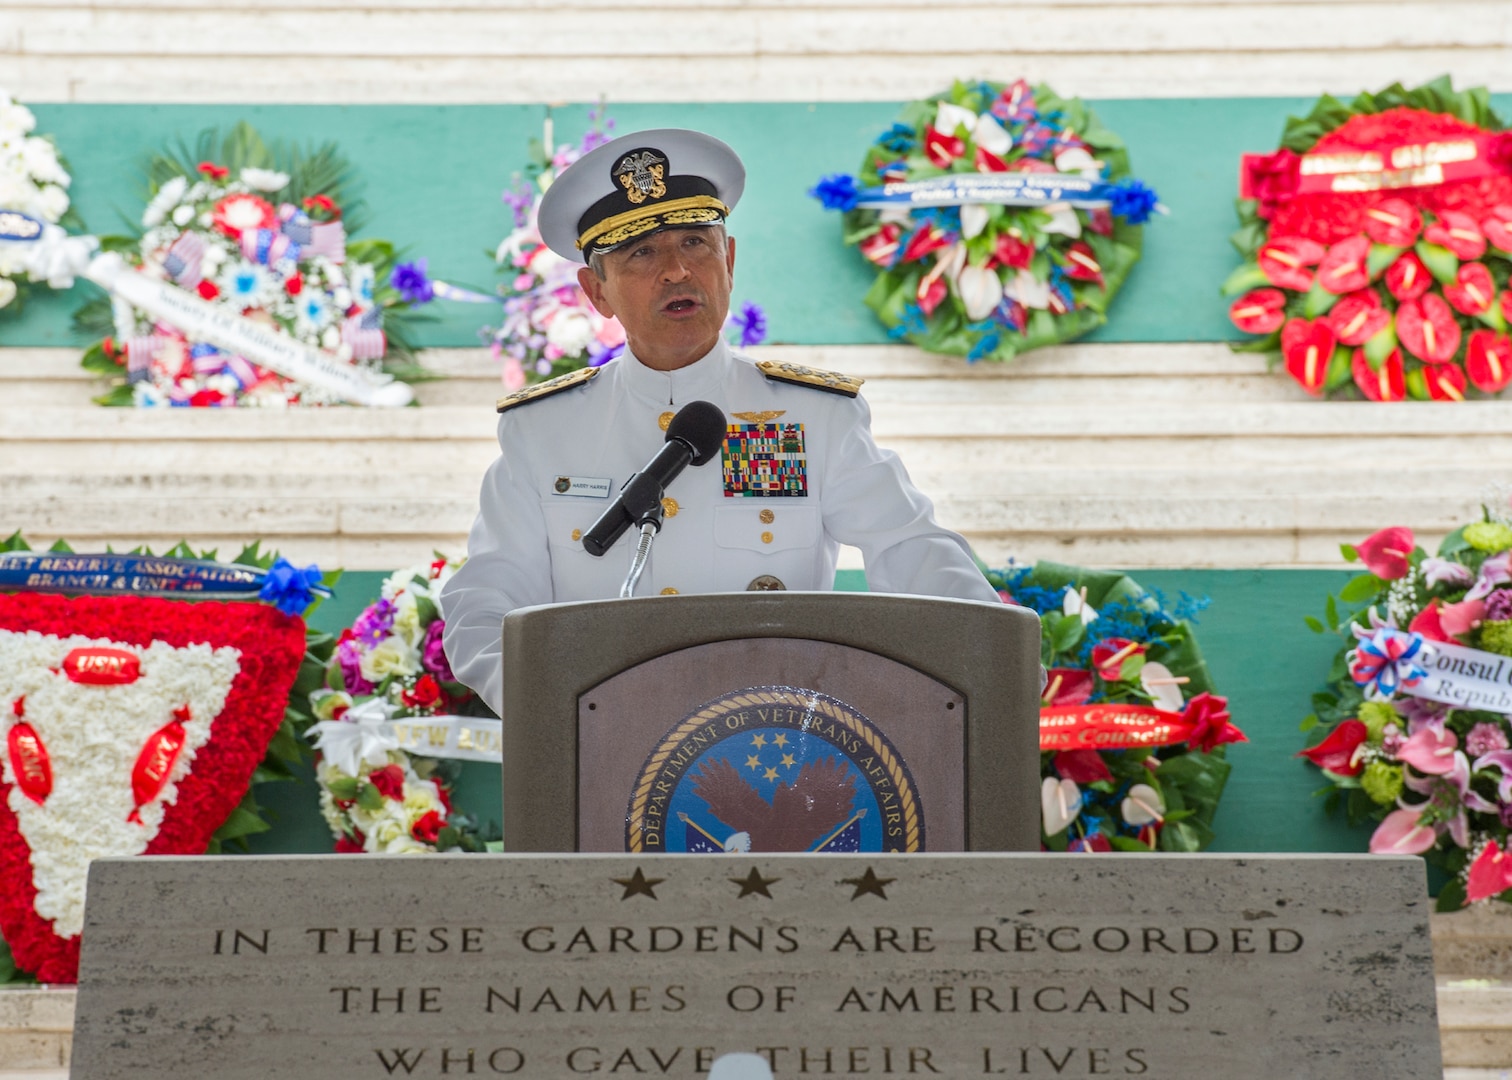 171111-N-WY954-121 HONOLULU, Hawaii (Nov. 11, 2017) — Commander U.S. Pacific Command, Adm. Harry Harris, delivers his remarks during a Veterans Day ceremony held at the National Memorial Cemetery of the Pacific. The ceremony recognized and gave thanks to all the veterans who have served and continue to serve the military and their families. (U.S. Navy photo by Mass Communication Specialist 2nd Class Robin W. Peak)